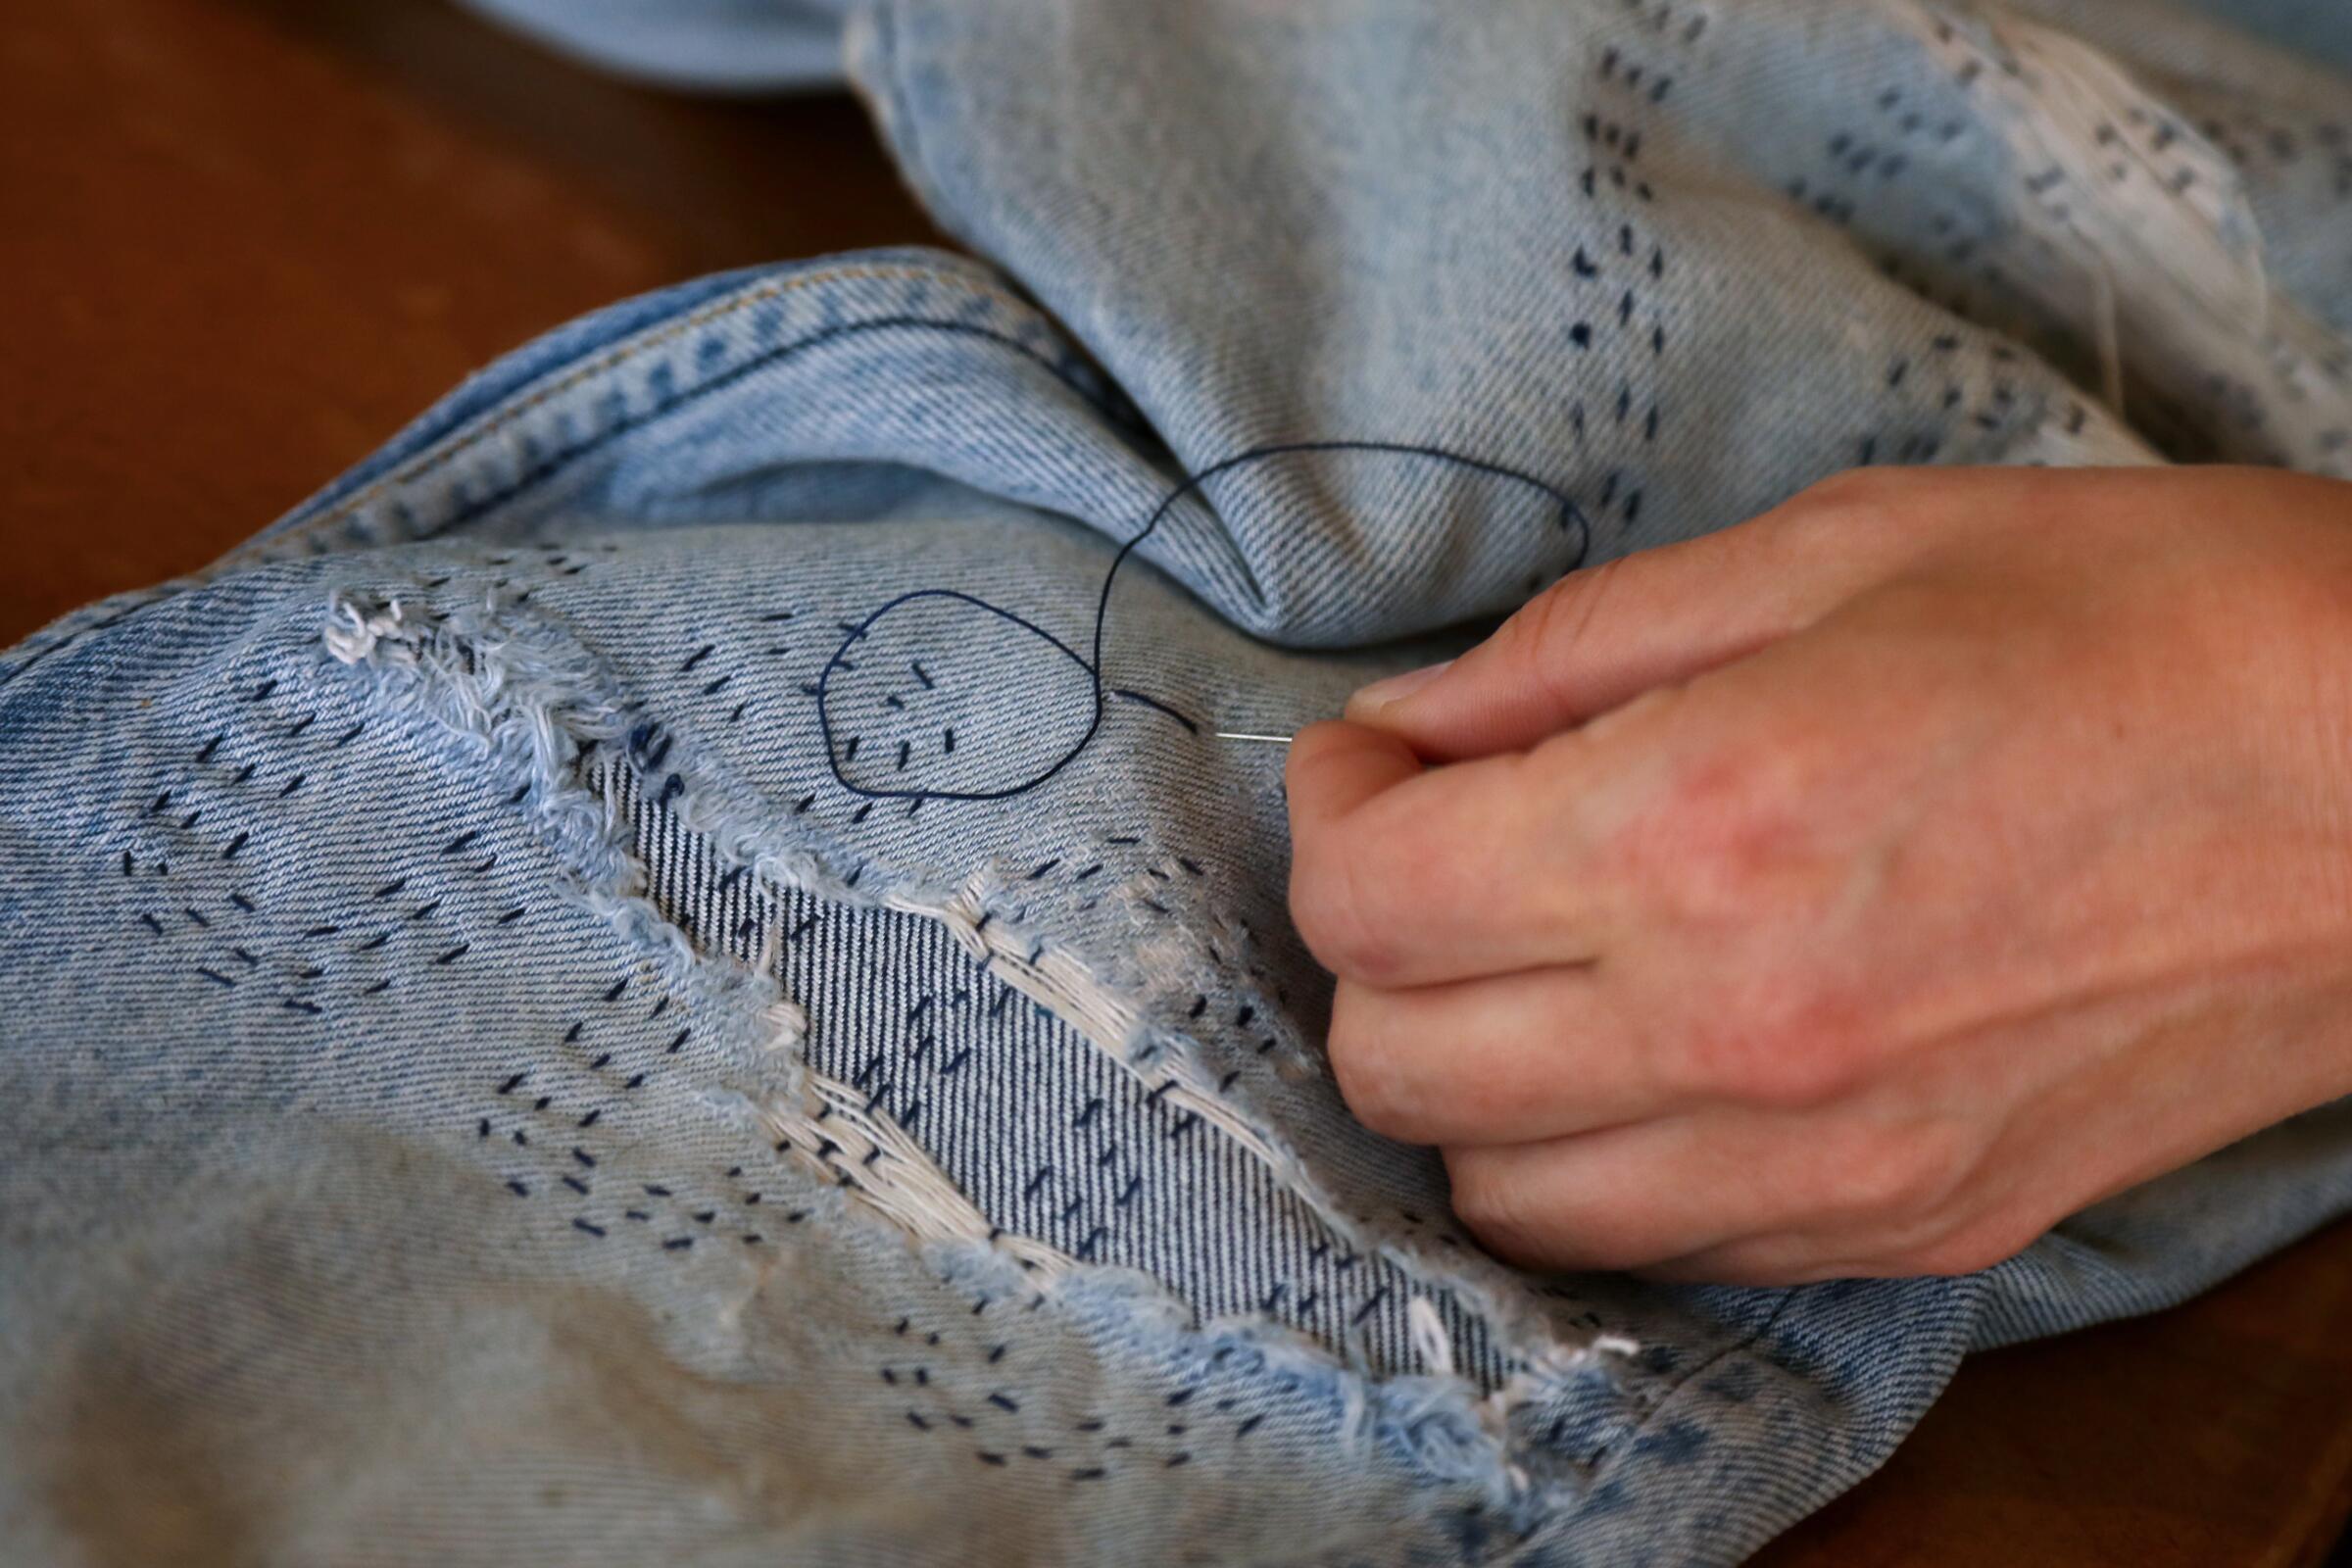 Weathered jeans are hand-stitched.